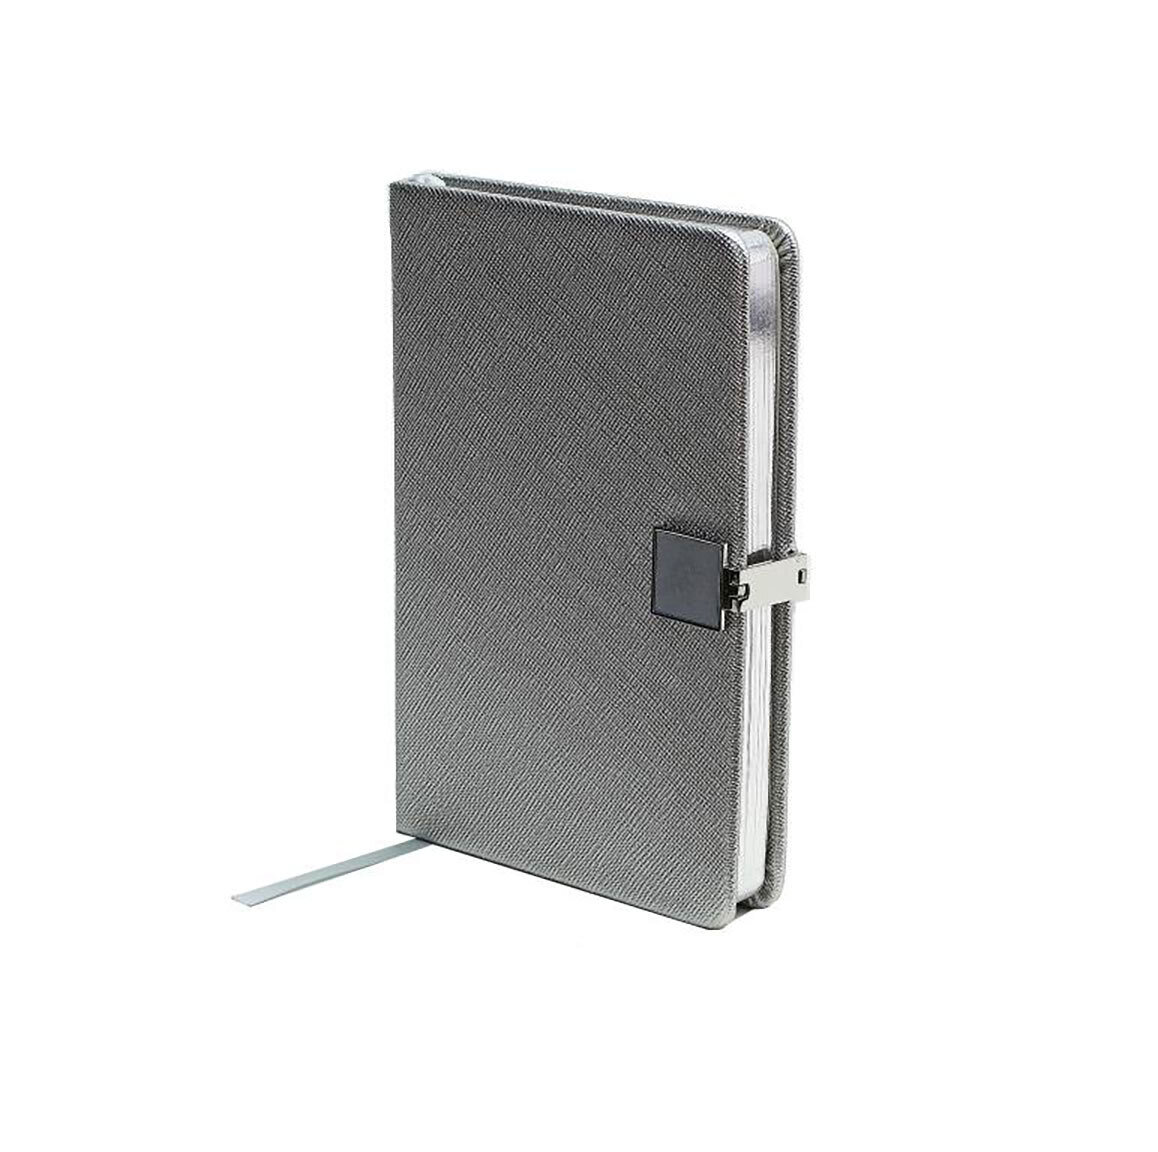 Addison Ross Notebook A6 Silver & Silver Pu Leather NB1253